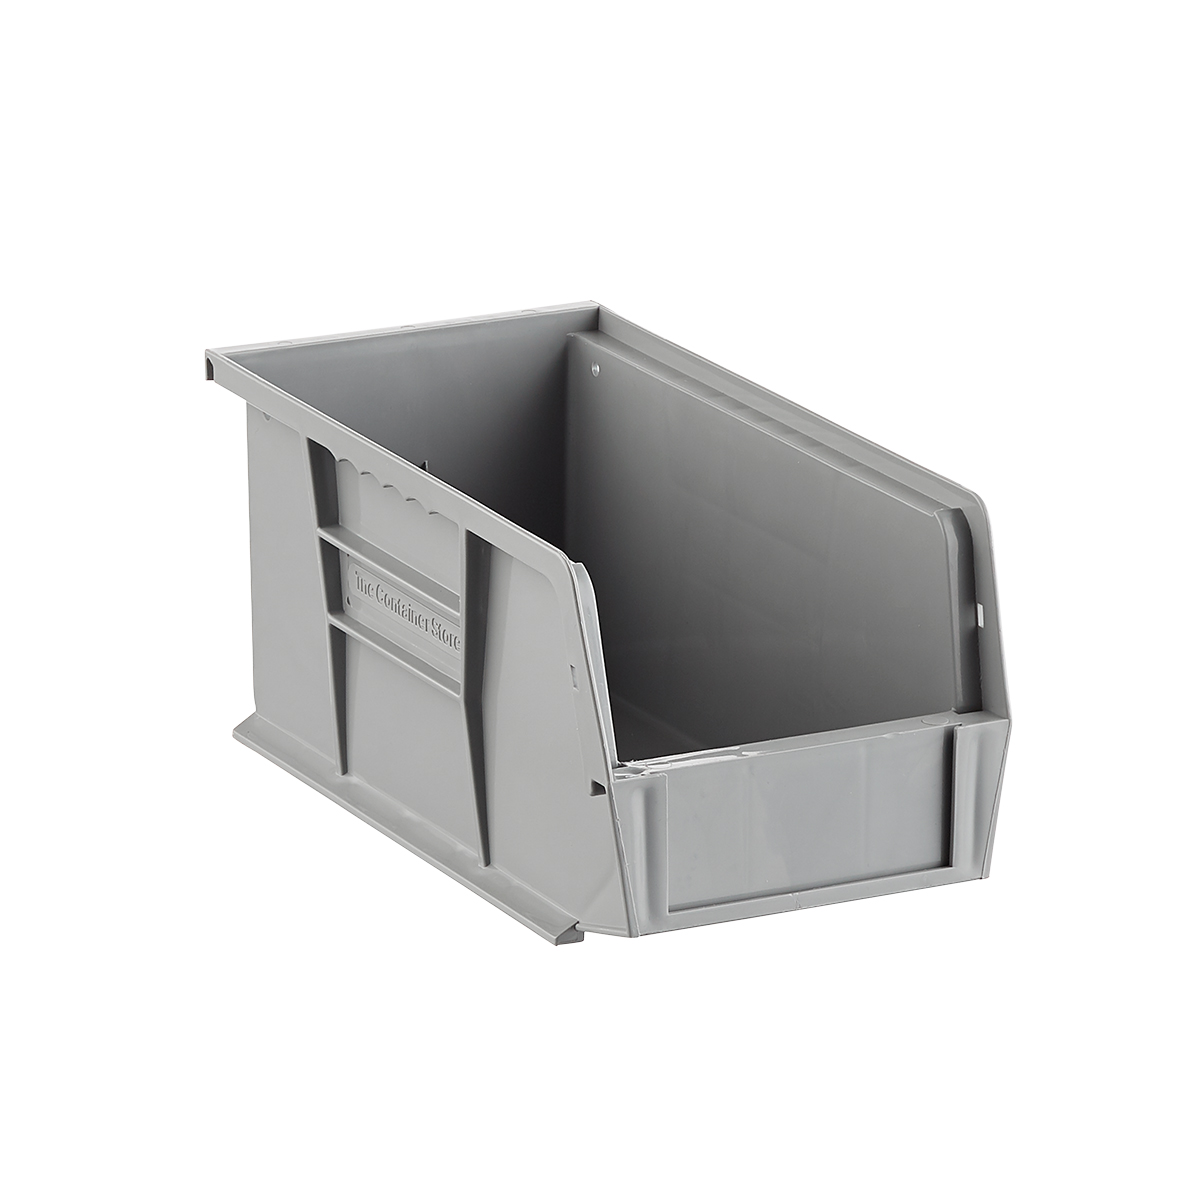 The Container Store Narrow Stackable Plastic Utility Bin - Gray - 5-1/2 x 10-7/8 x 5 H - Each